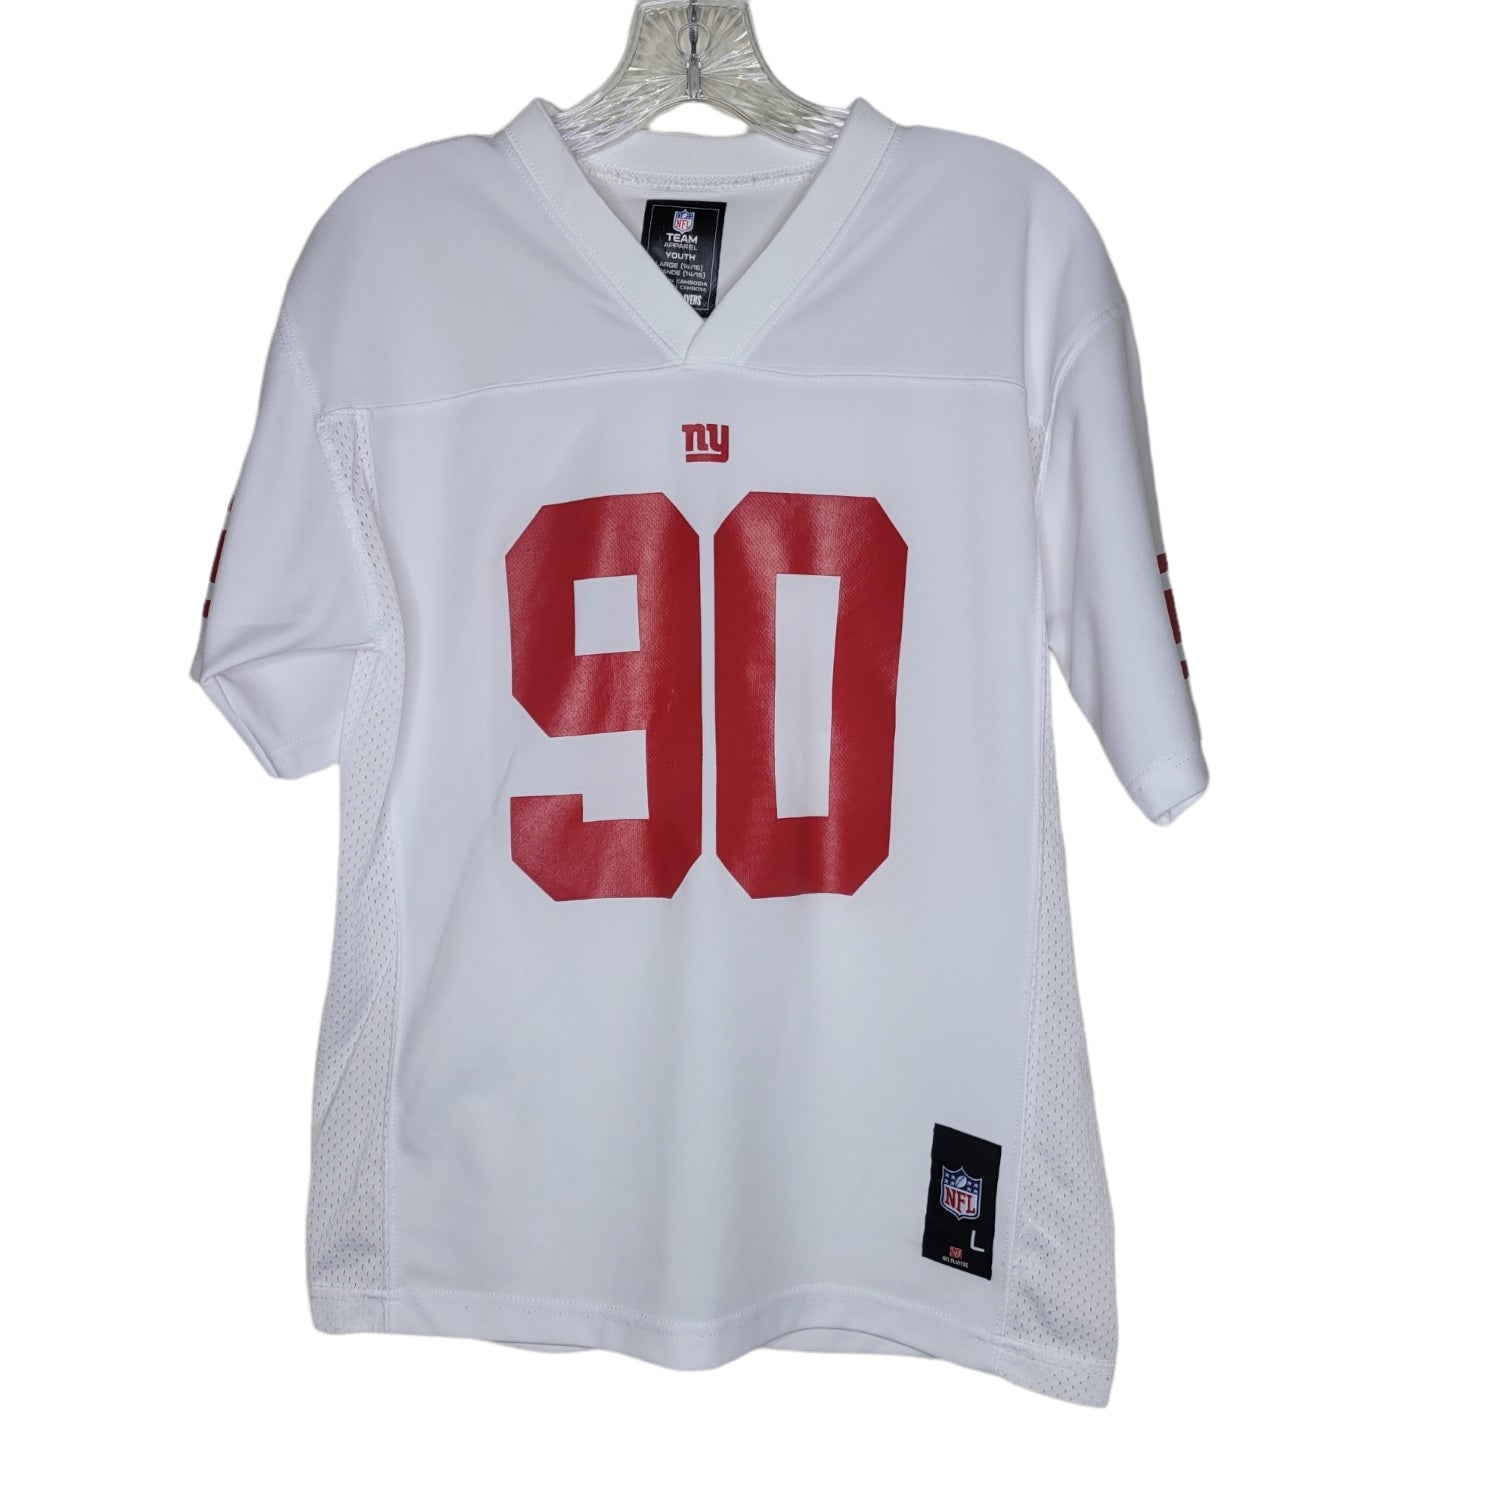 NFL Team Apparel Youth White Jersey NY Giants Pierre-Paul 90 Youth Large 14/16